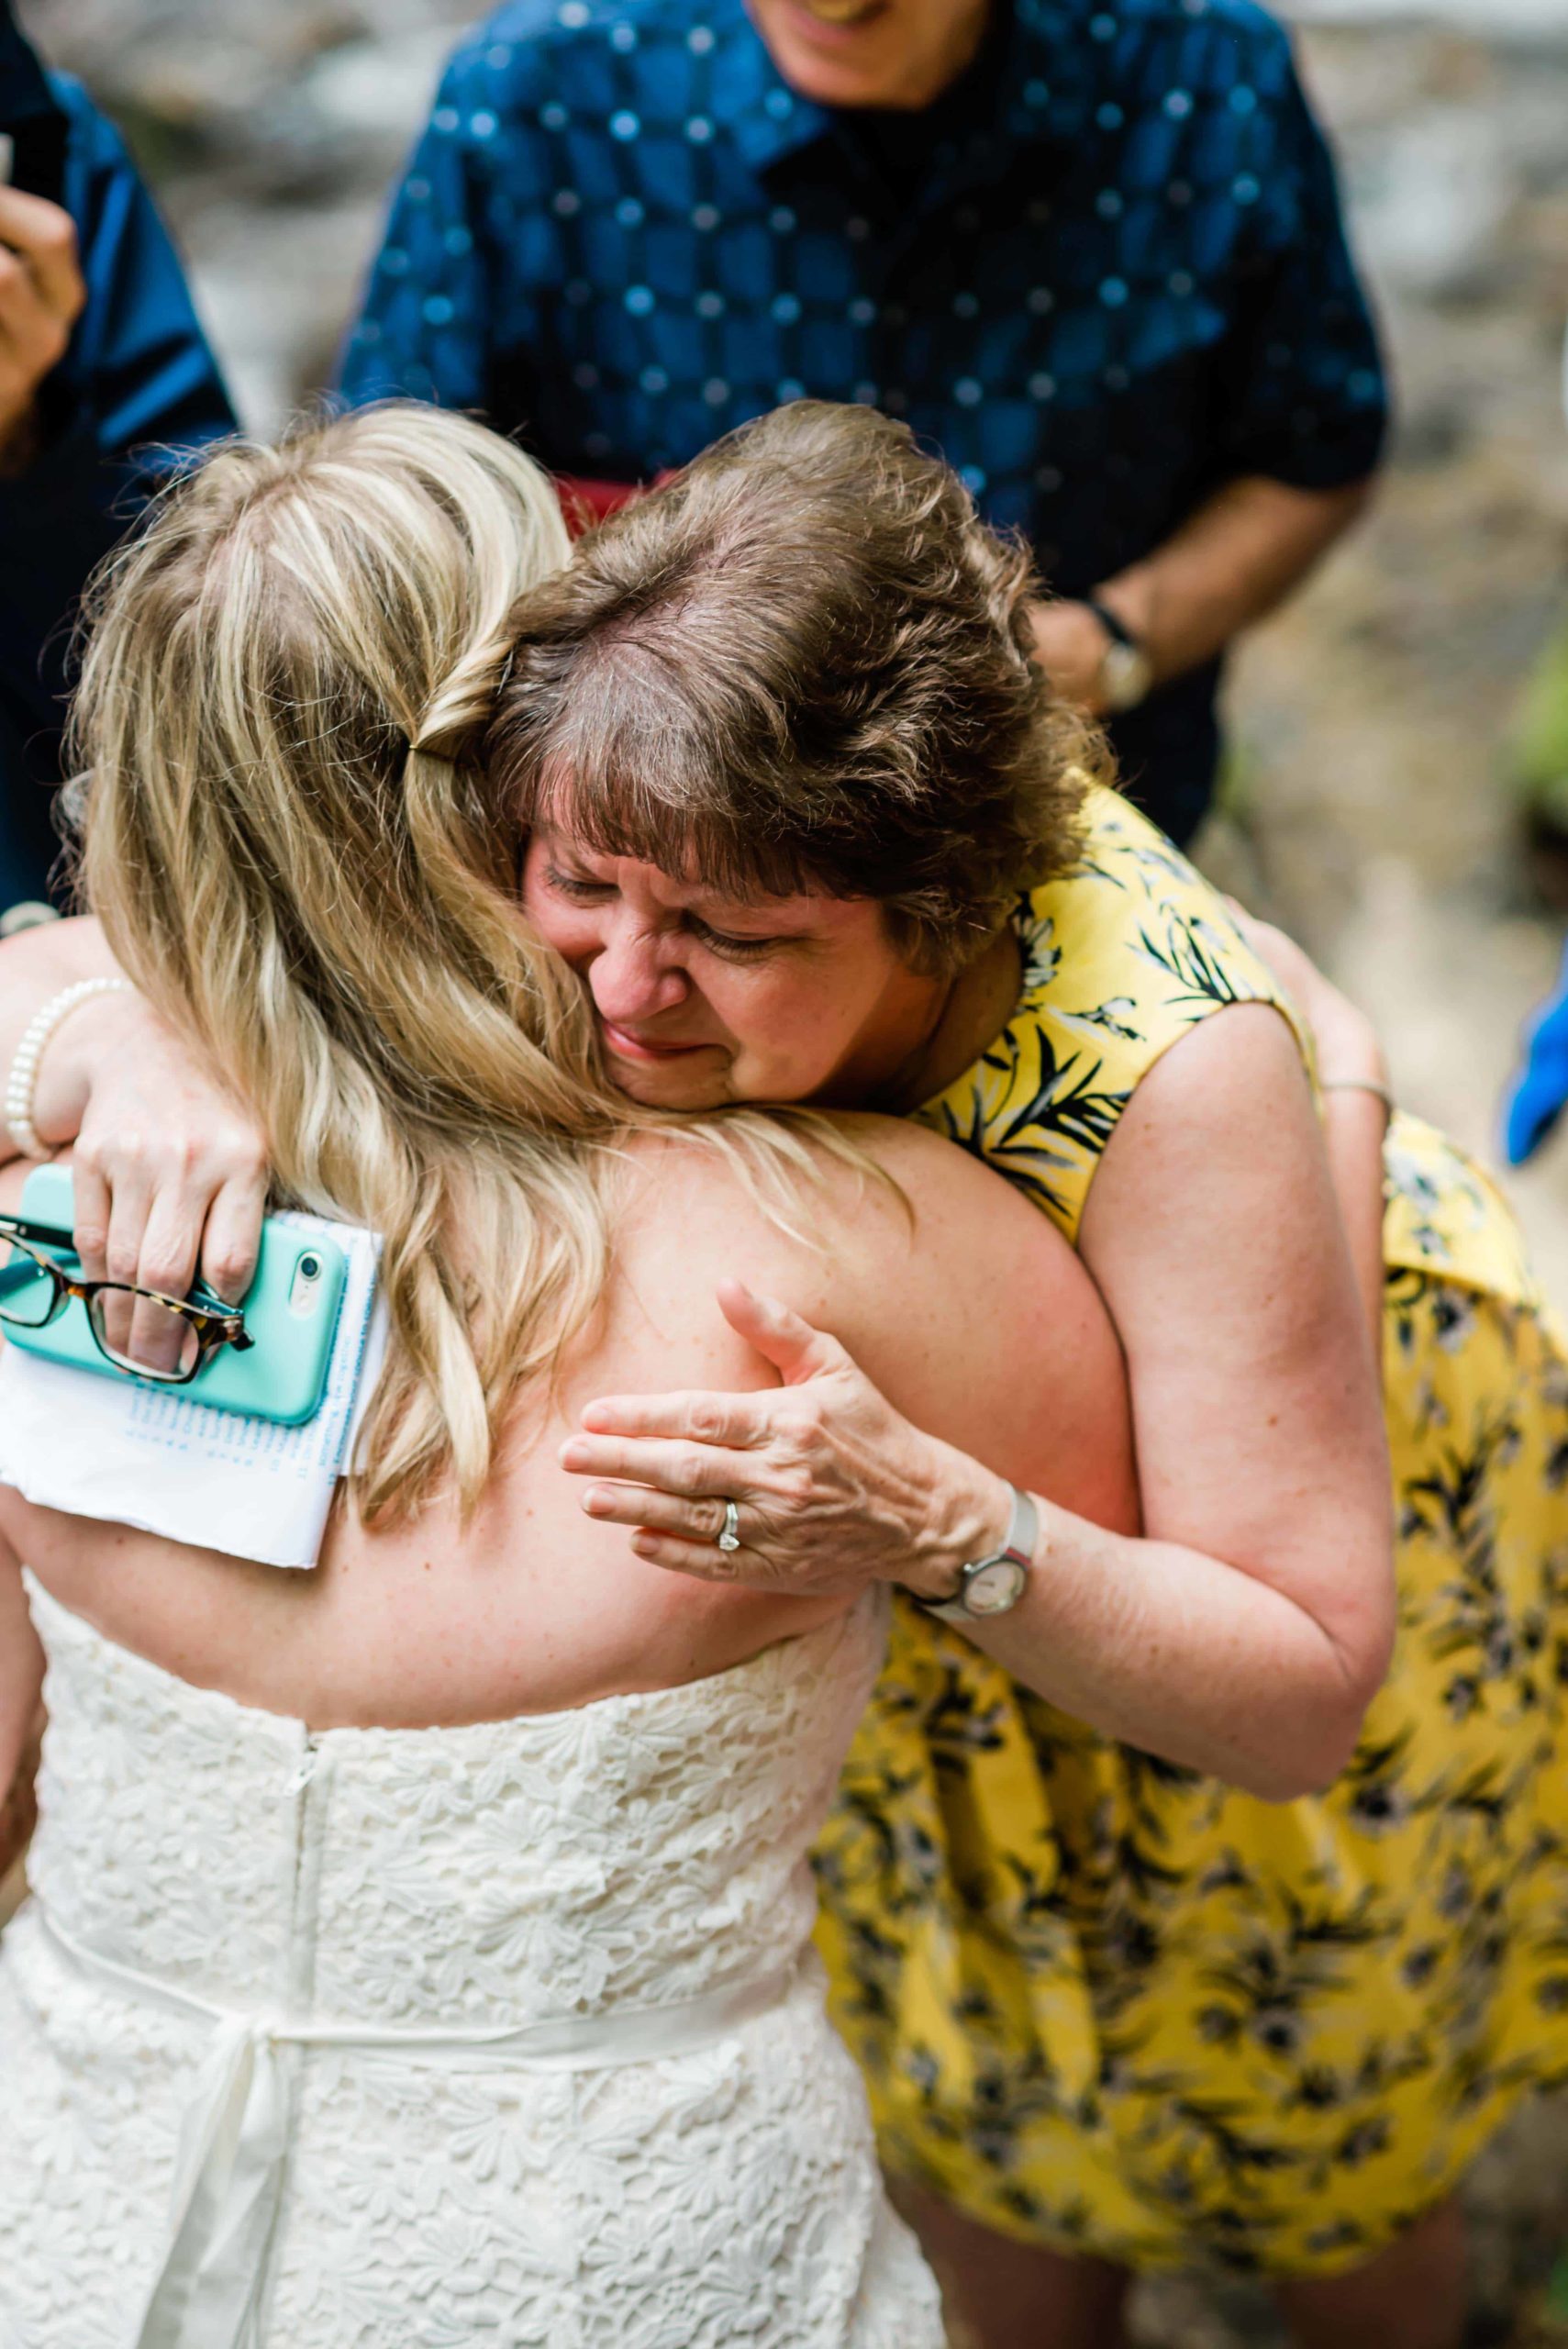 After vow reading in an adventure elopement with family, a mother tearfully hugs the bride